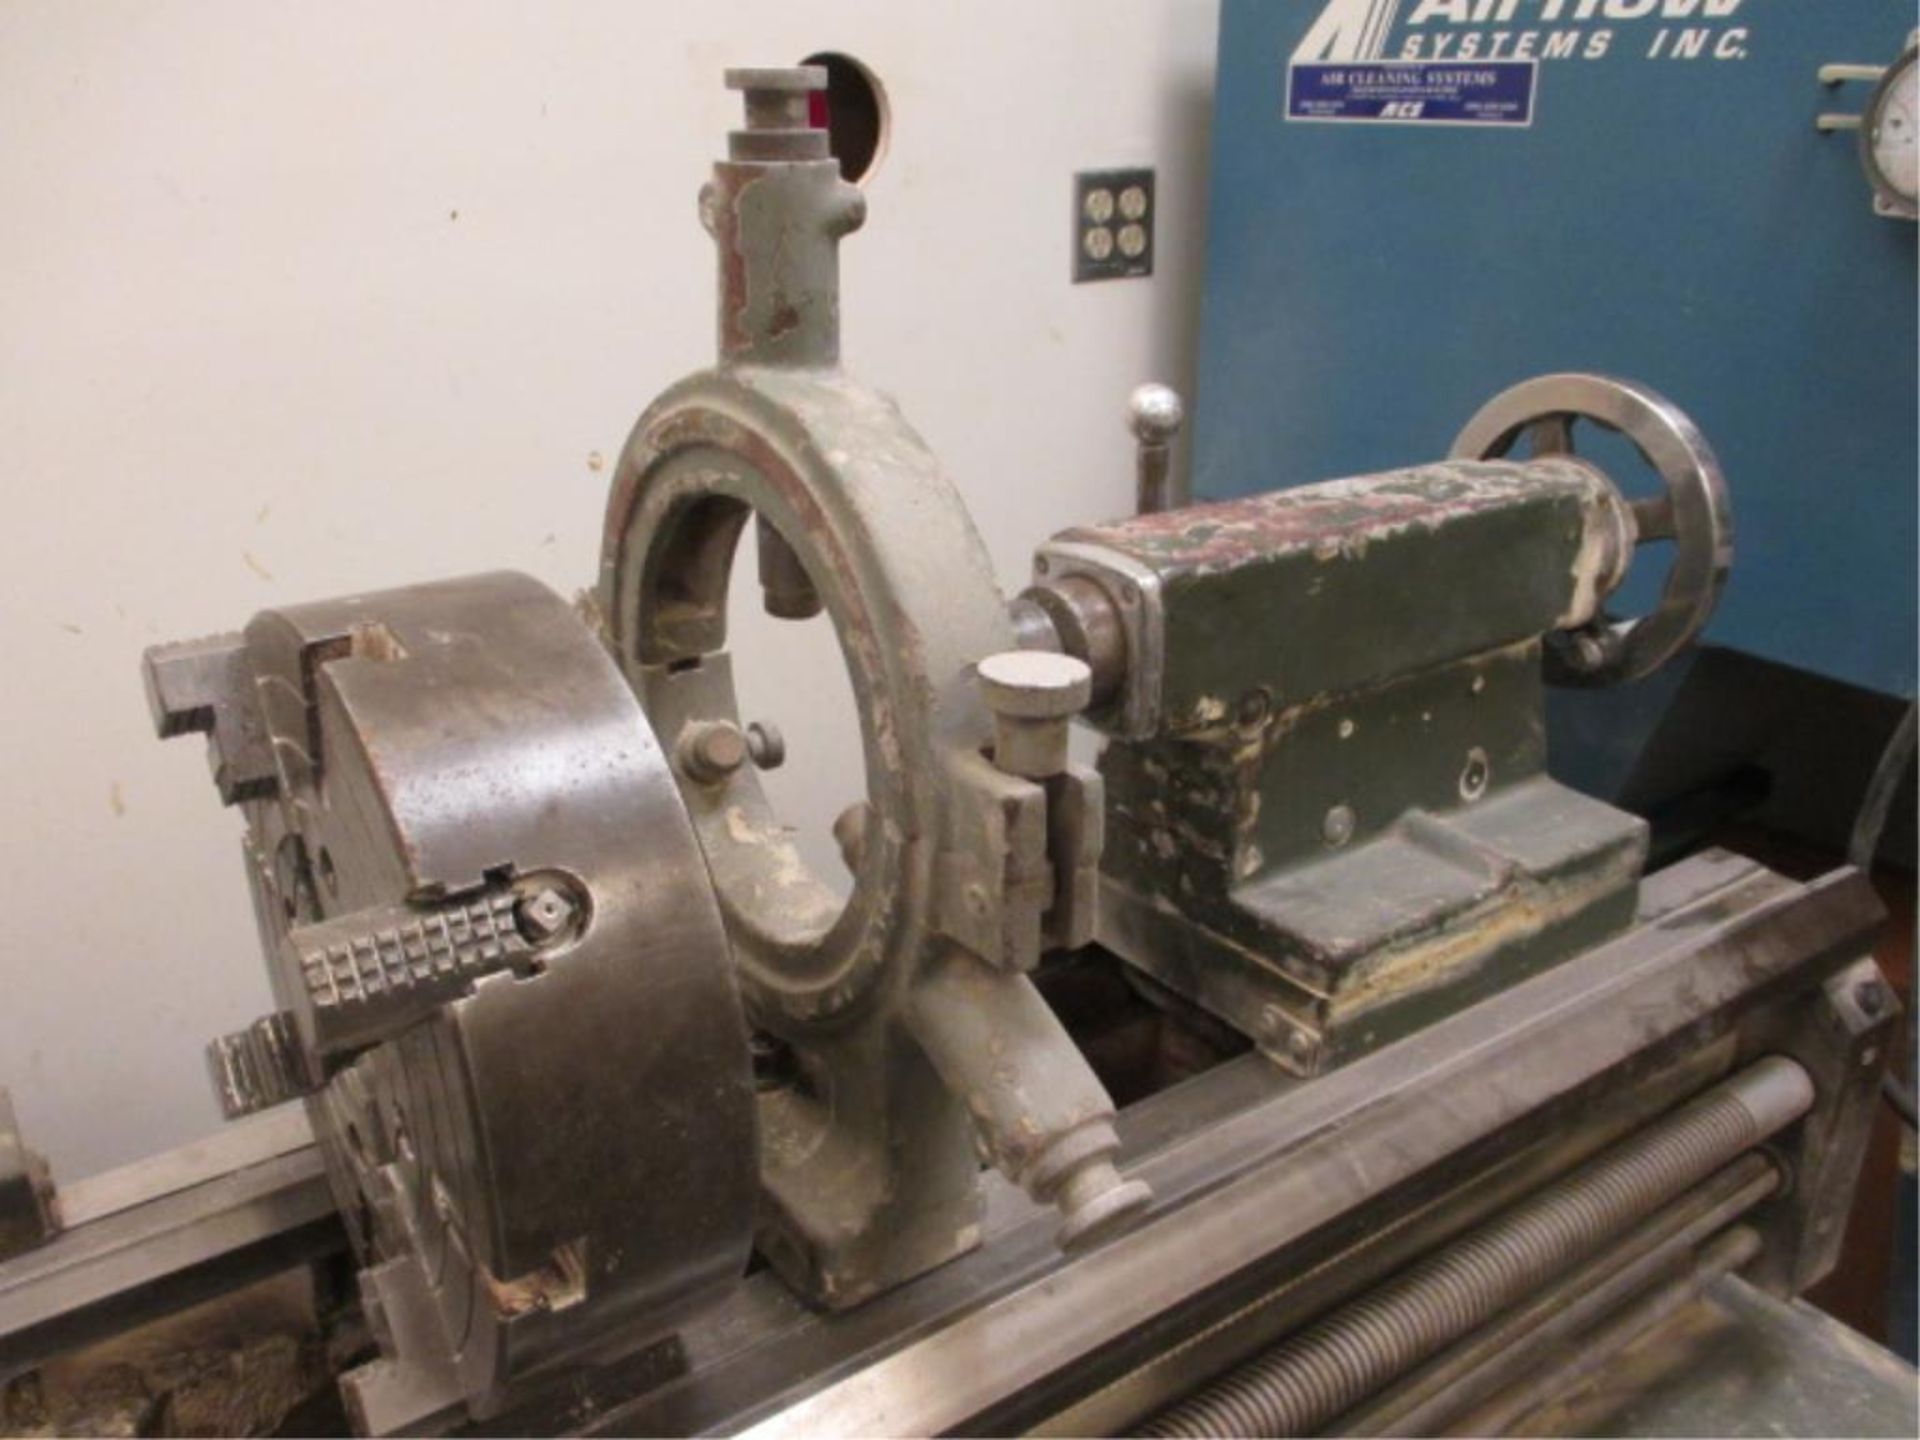 Lathe. Cadillac 1749G Engine Lathe with 12" 3-Jaw Chuck, 2 1/8" Spindle Bore, 12" 4-Jaw Chuck, - Image 2 of 4